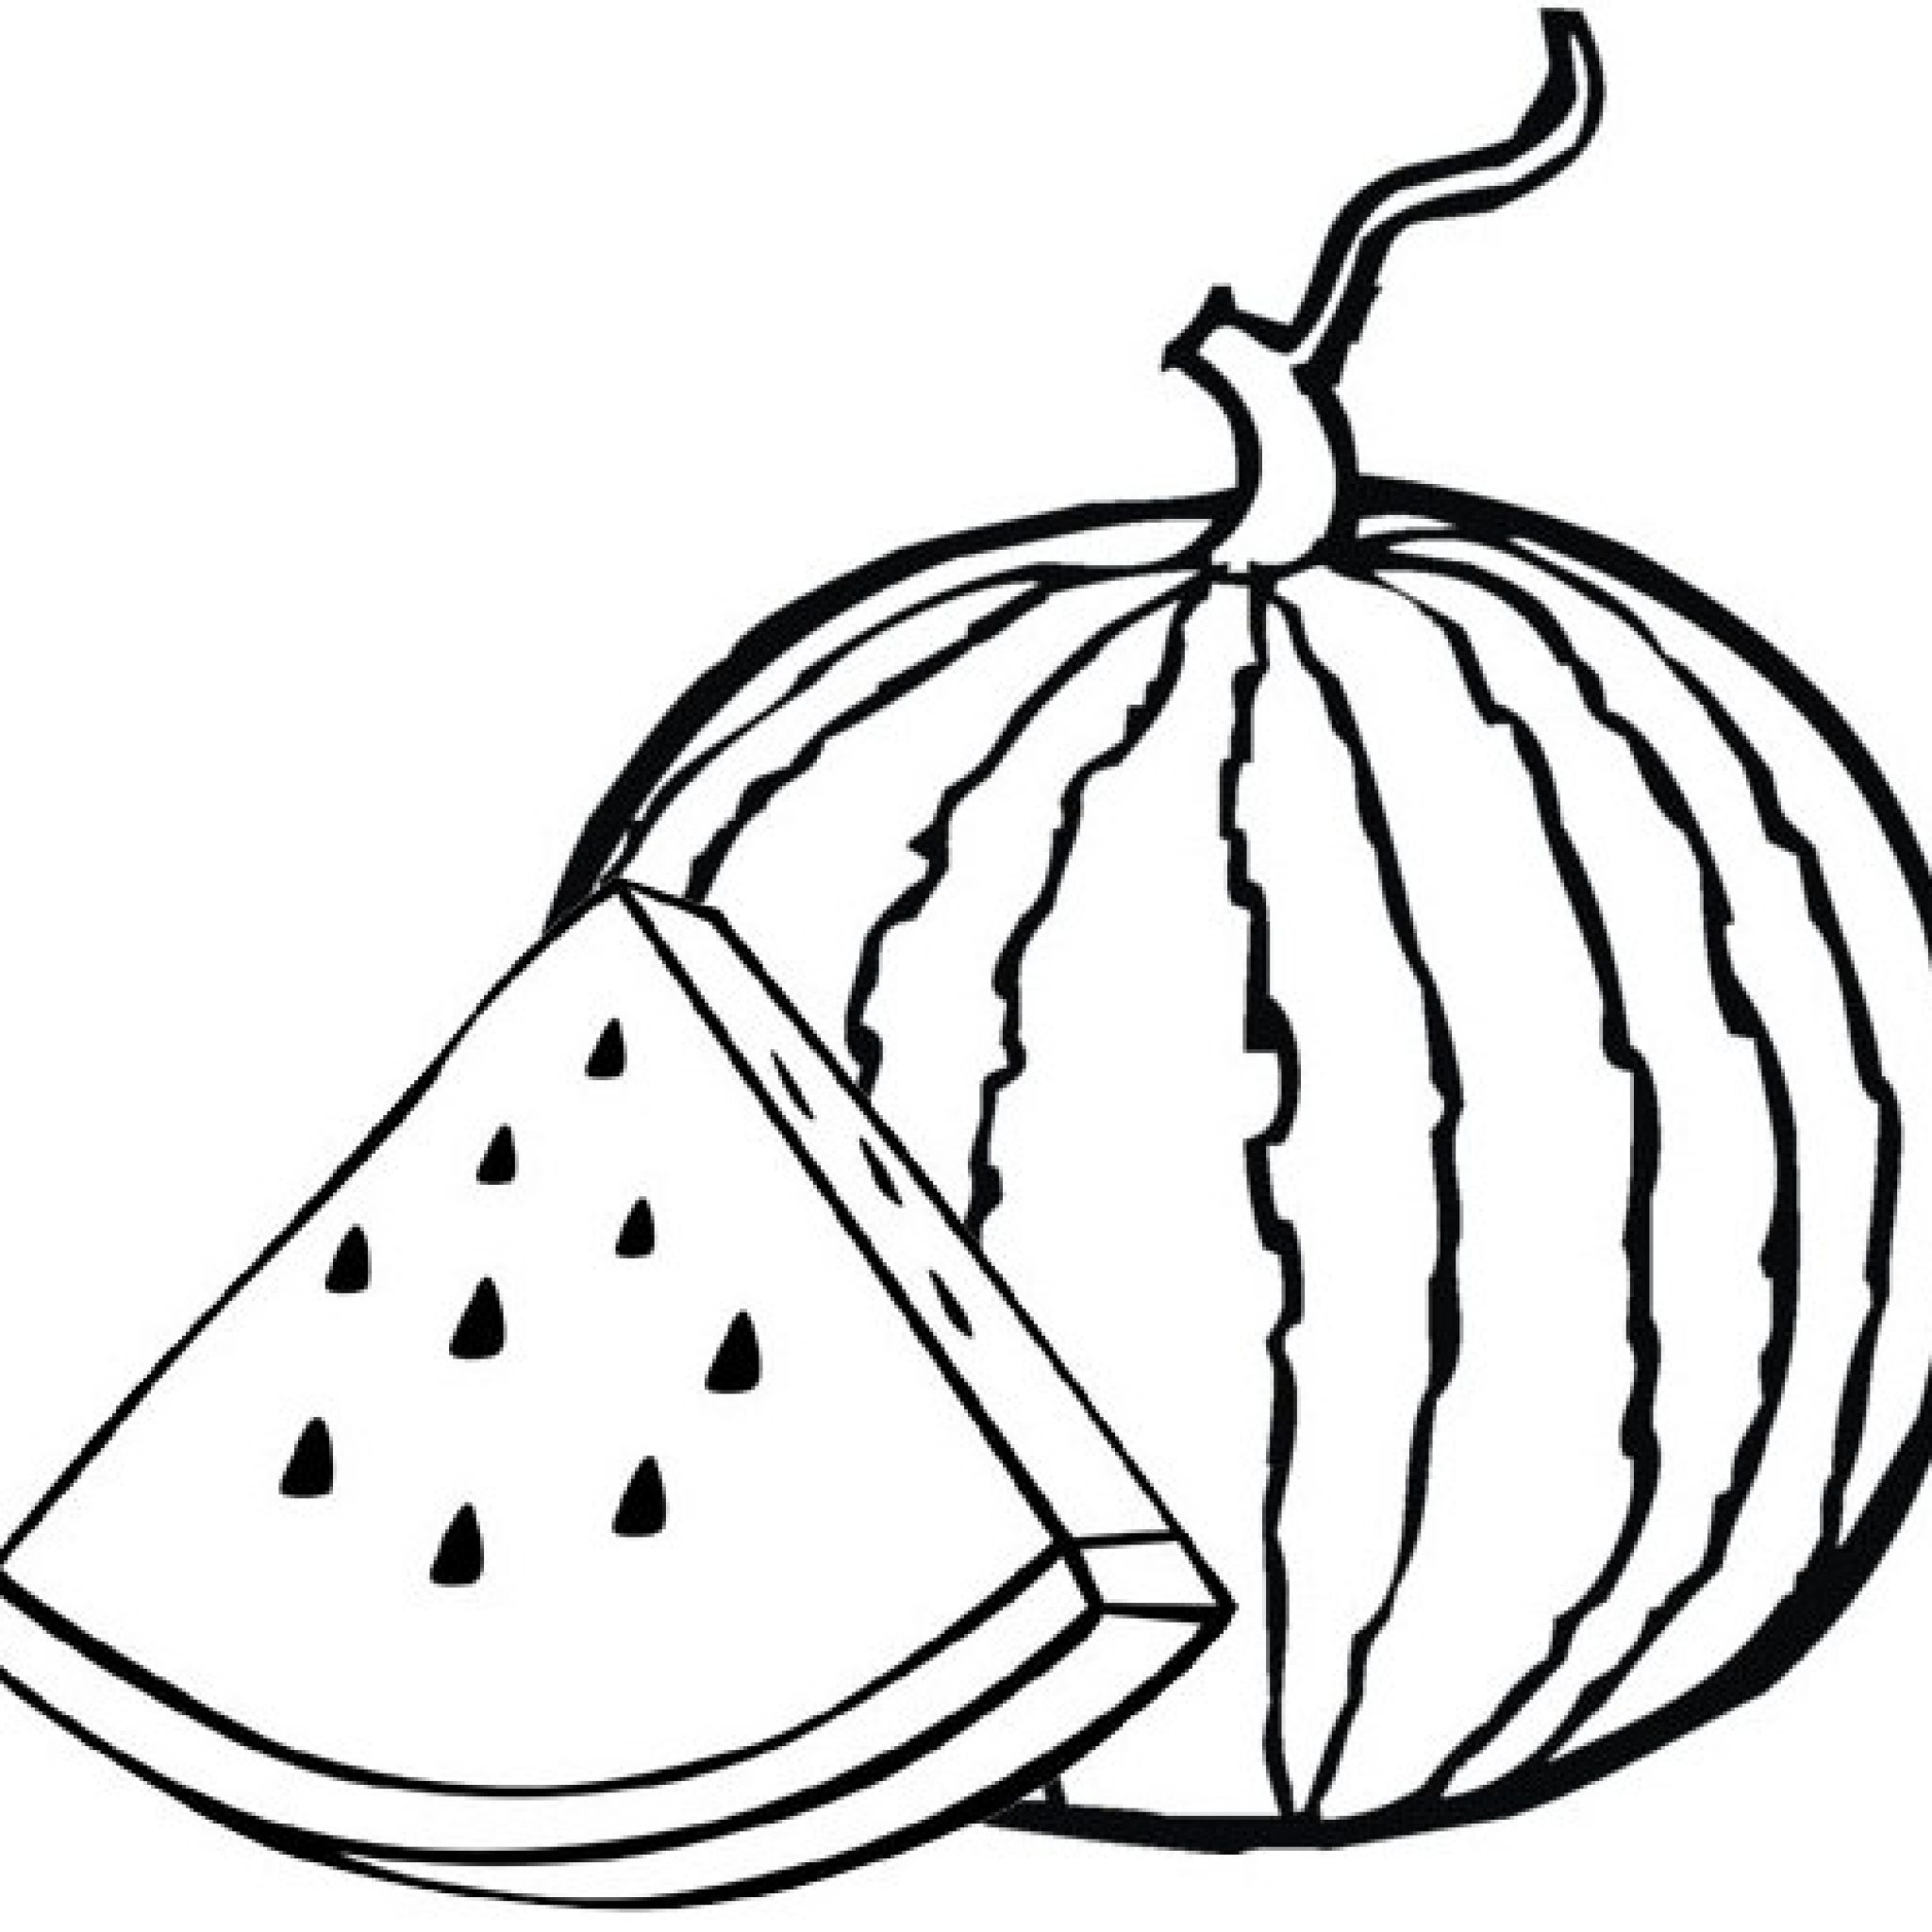 Sweet and Fresh Watermelon Coloring Pages for Children and Families